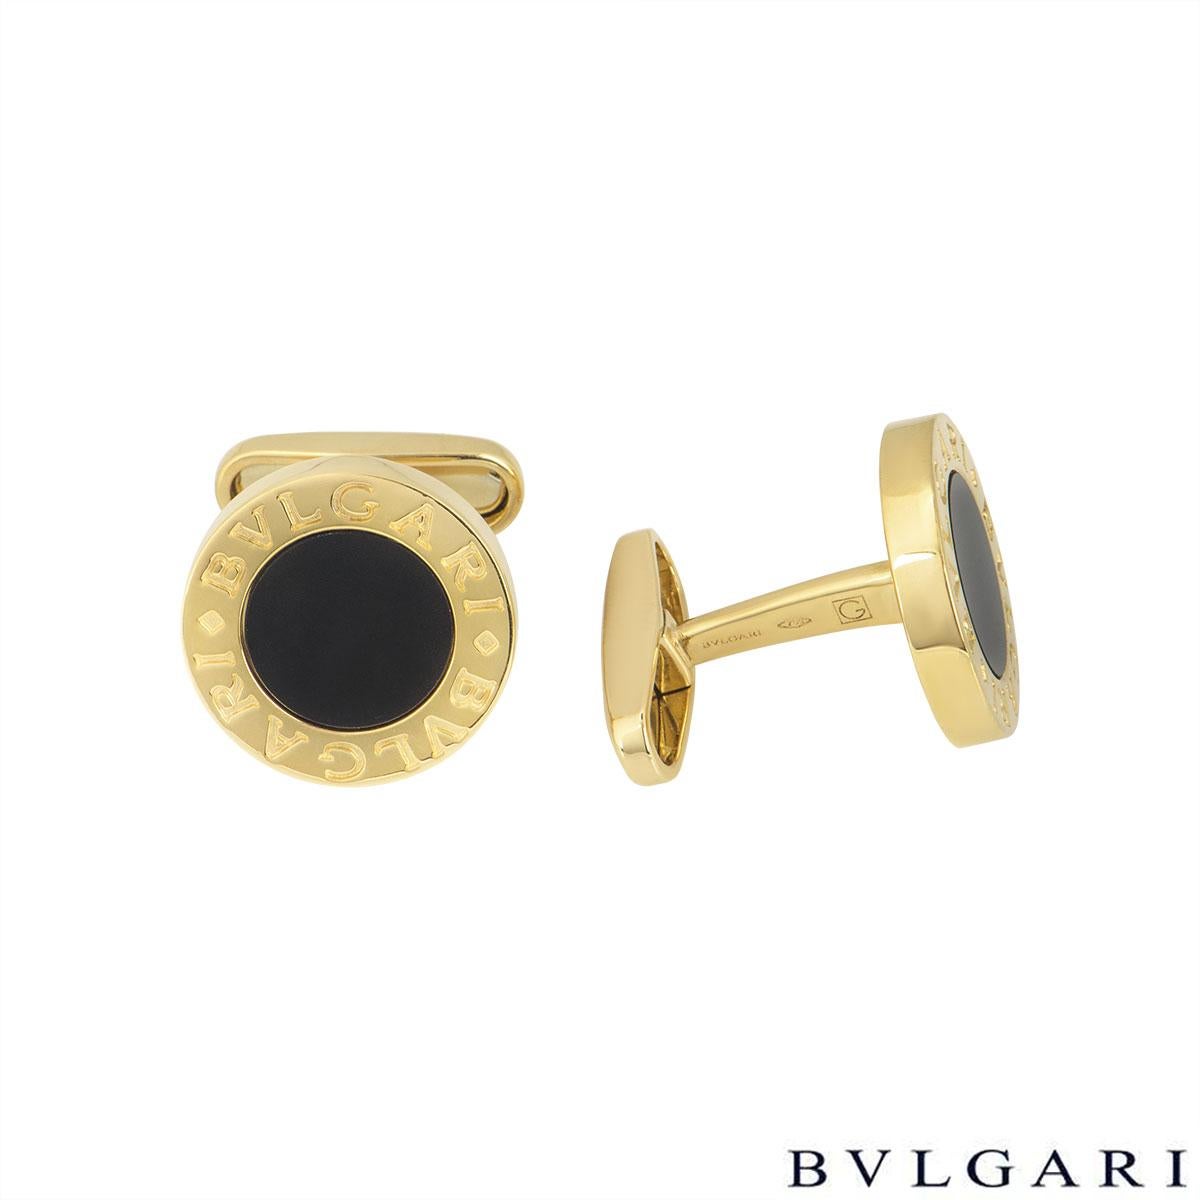 A pair of 18k yellow gold and onyx cufflinks by Bvlgari from the Bvlgari Bvlgari collection. The cufflinks comprise of a round onyx table featuring the iconic Bvlgari Bvlgari motif set to an 18k yellow gold border. The cufflinks are finished with